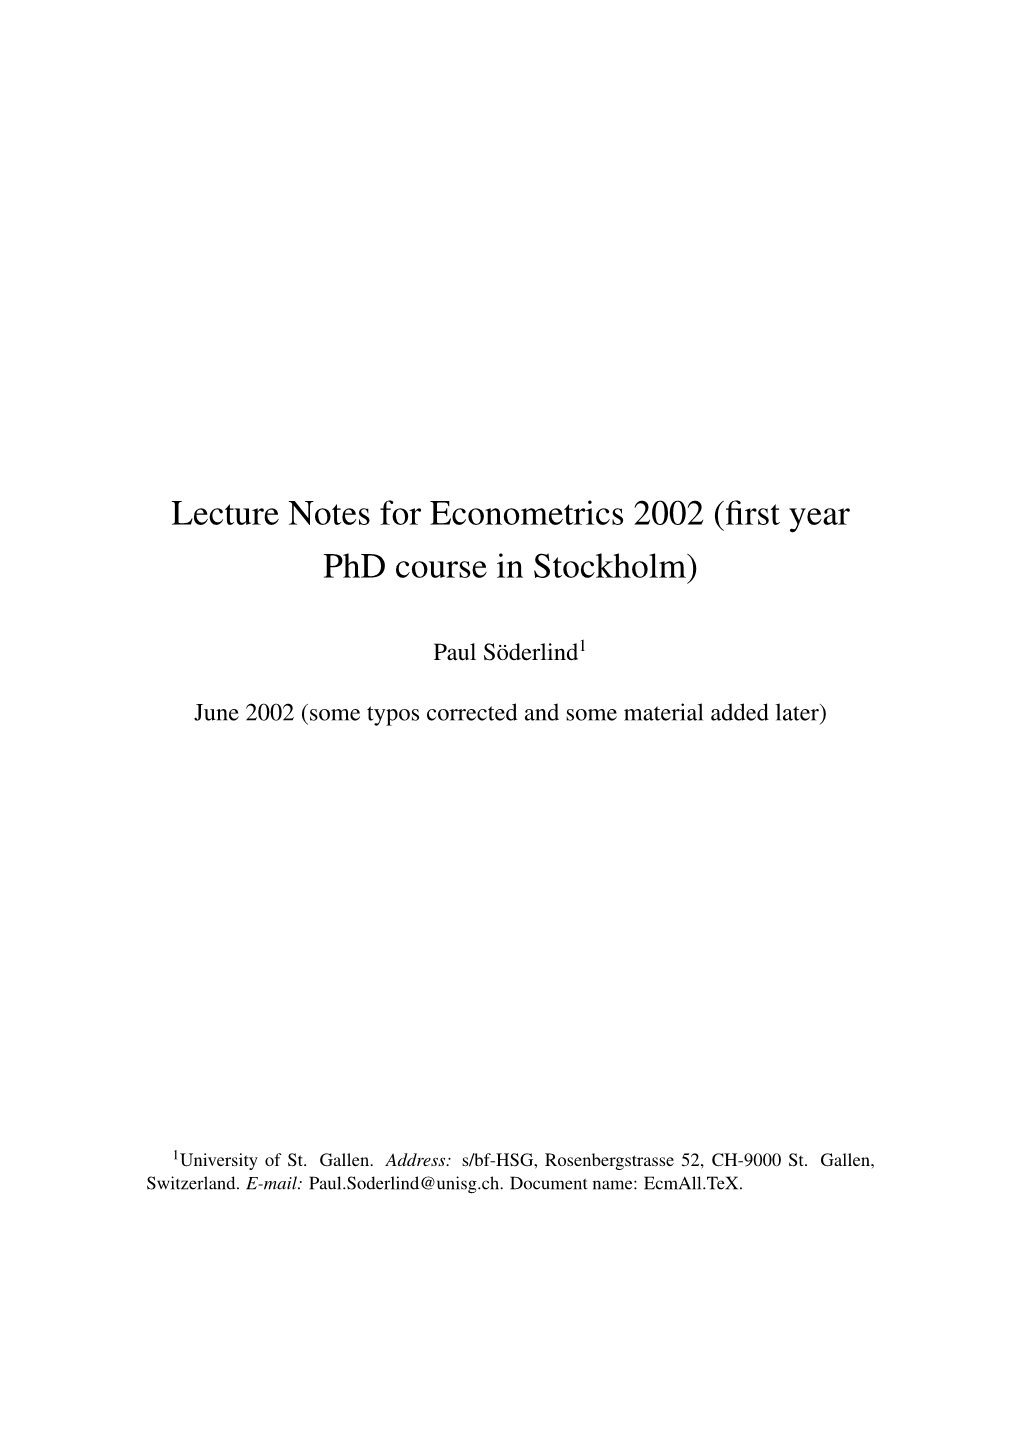 Lecture Notes for Econometrics 2002 (First Year Phd Course in Stockholm)